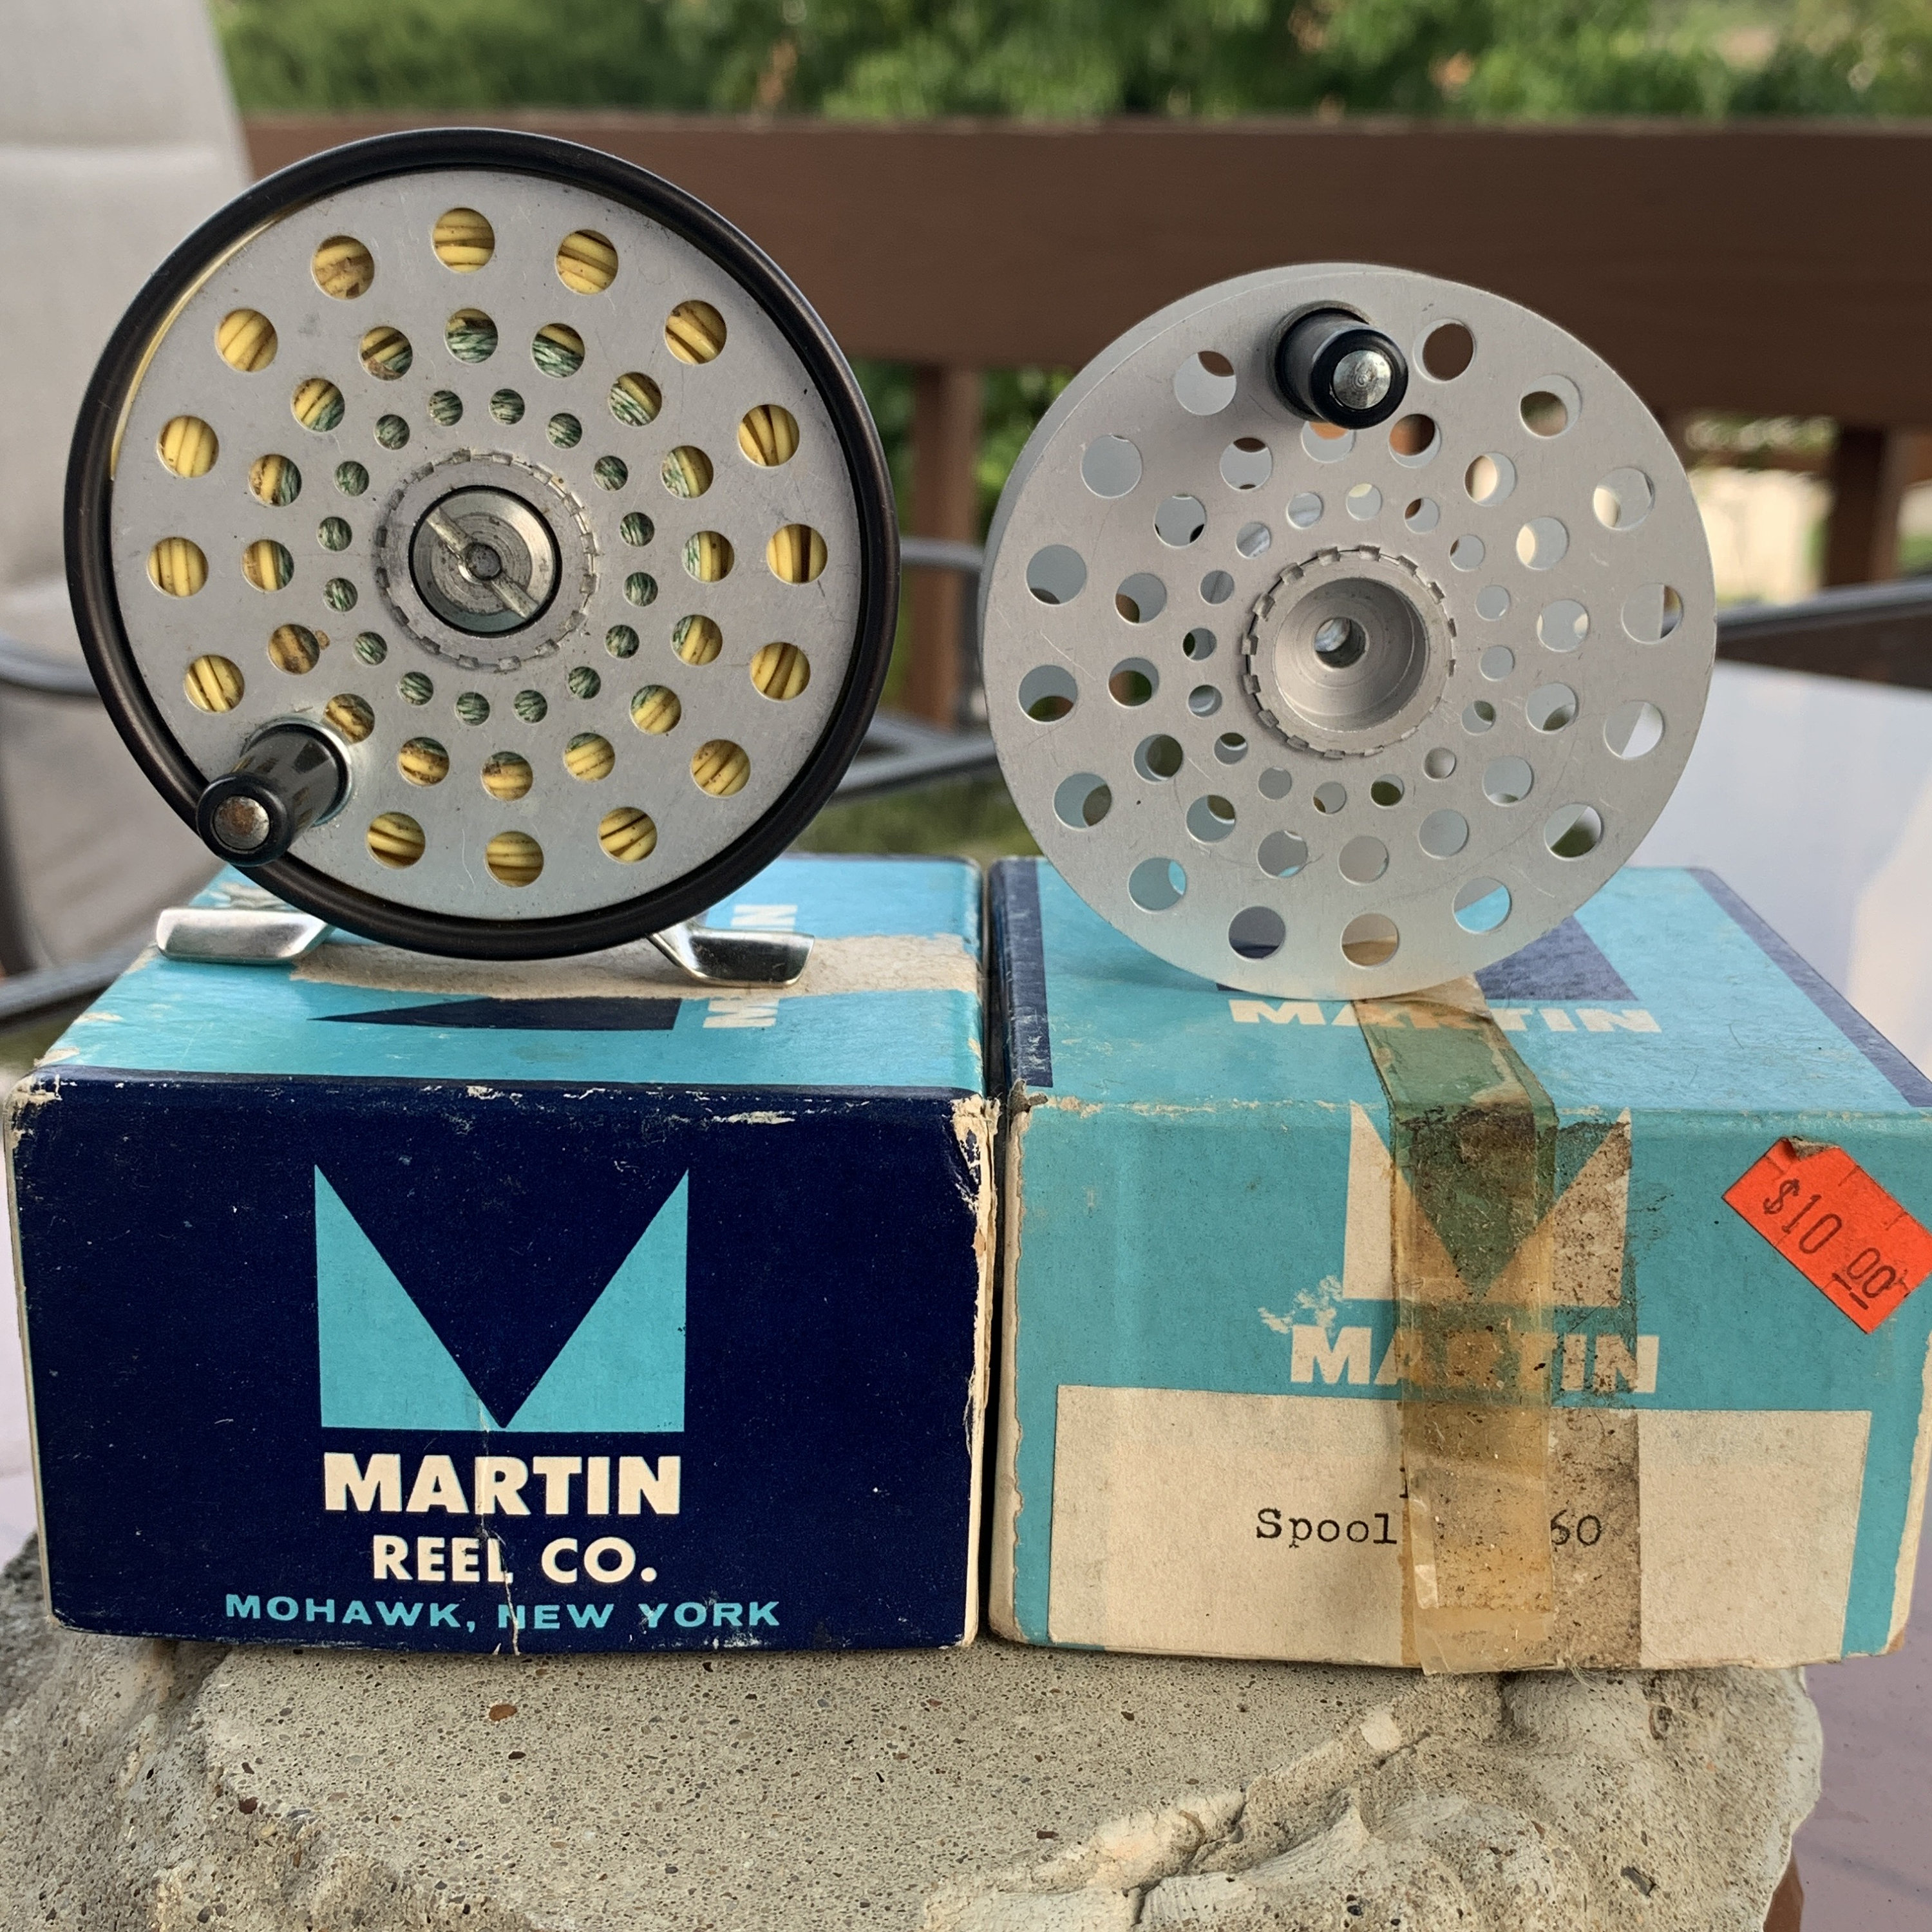 Martin Model 60 Fly Reel w/ Extra Spool Both in Box with Papers!